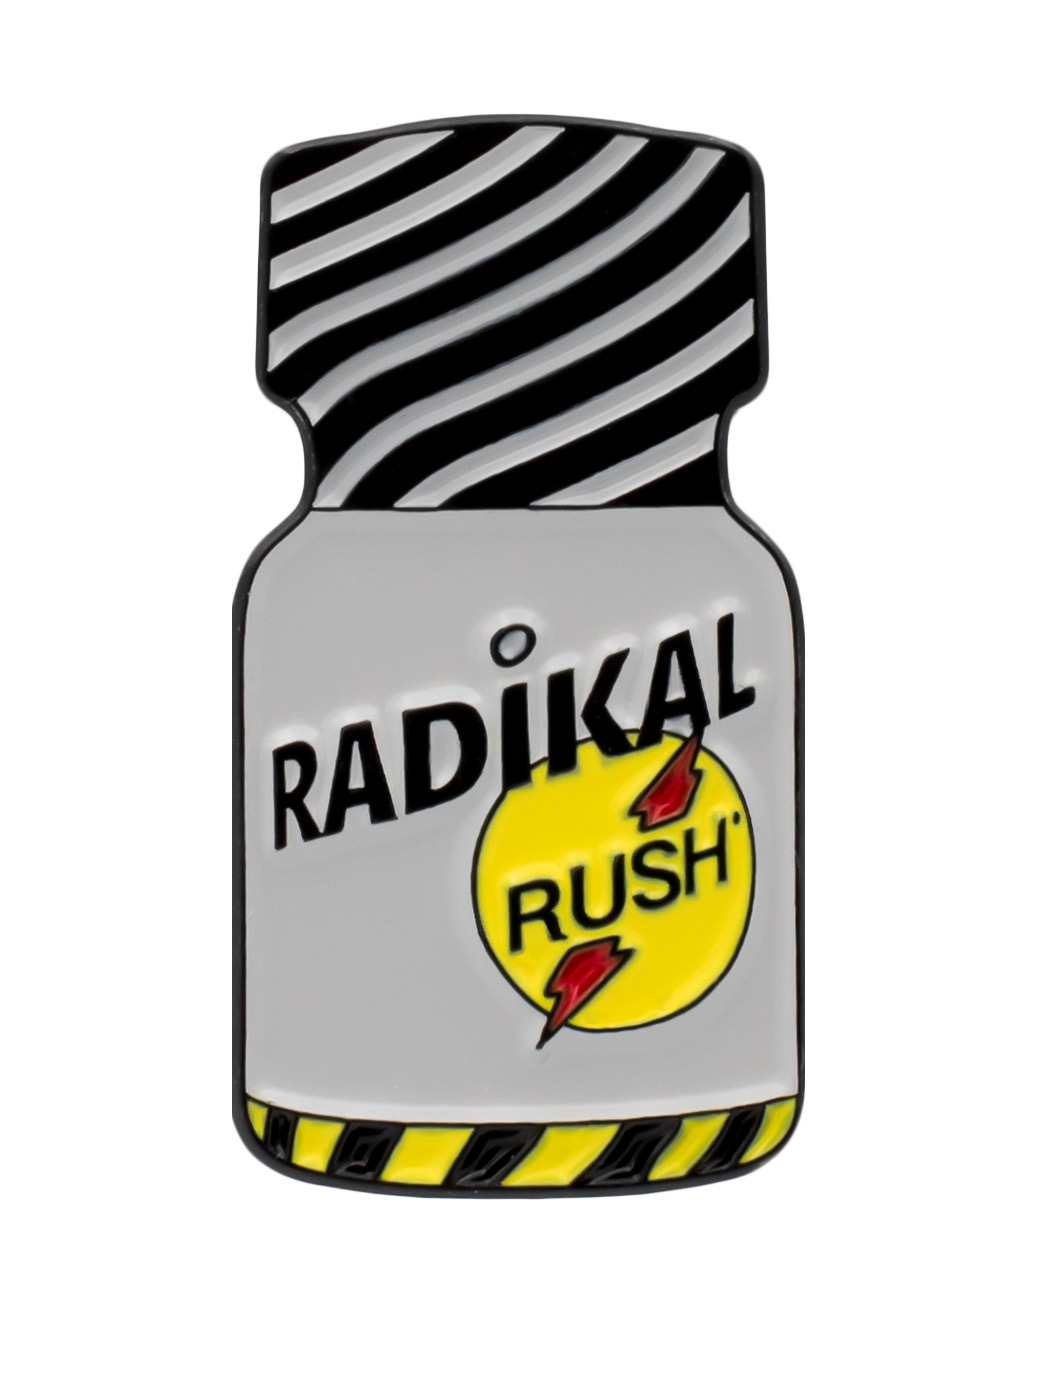 https://www.poppers.com/images/product_images/popup_images/poppers-pin-radikal-rush__1.jpg